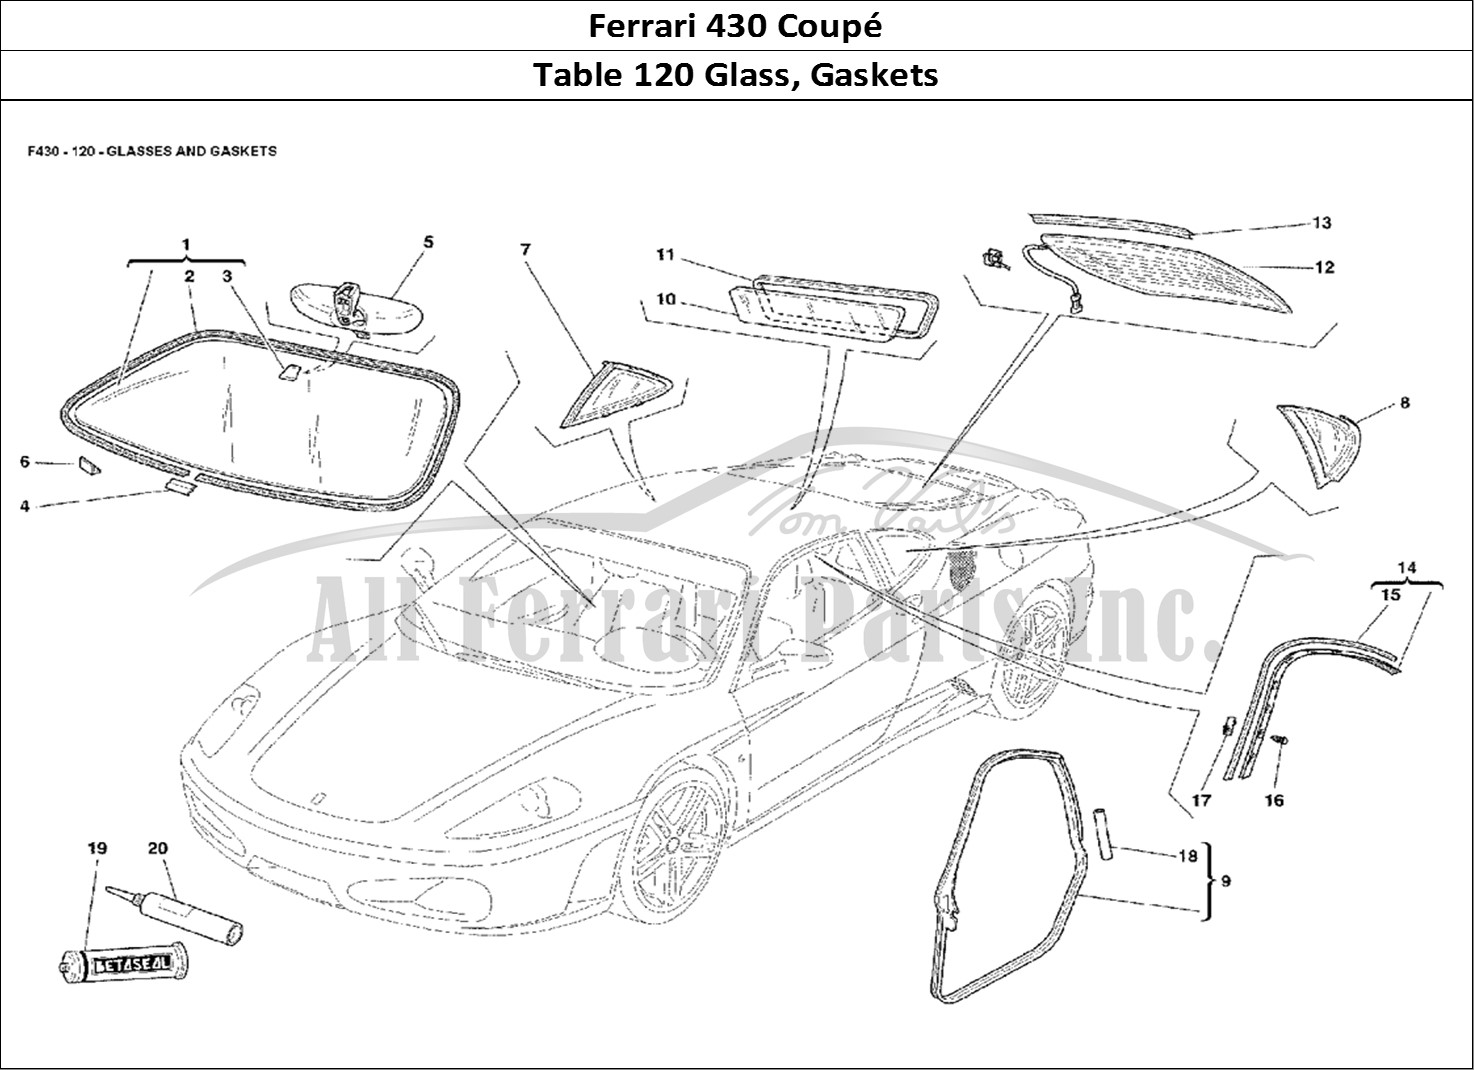 Ferrari Parts Ferrari 430 Coup Page 120 Glasses and Gaskets